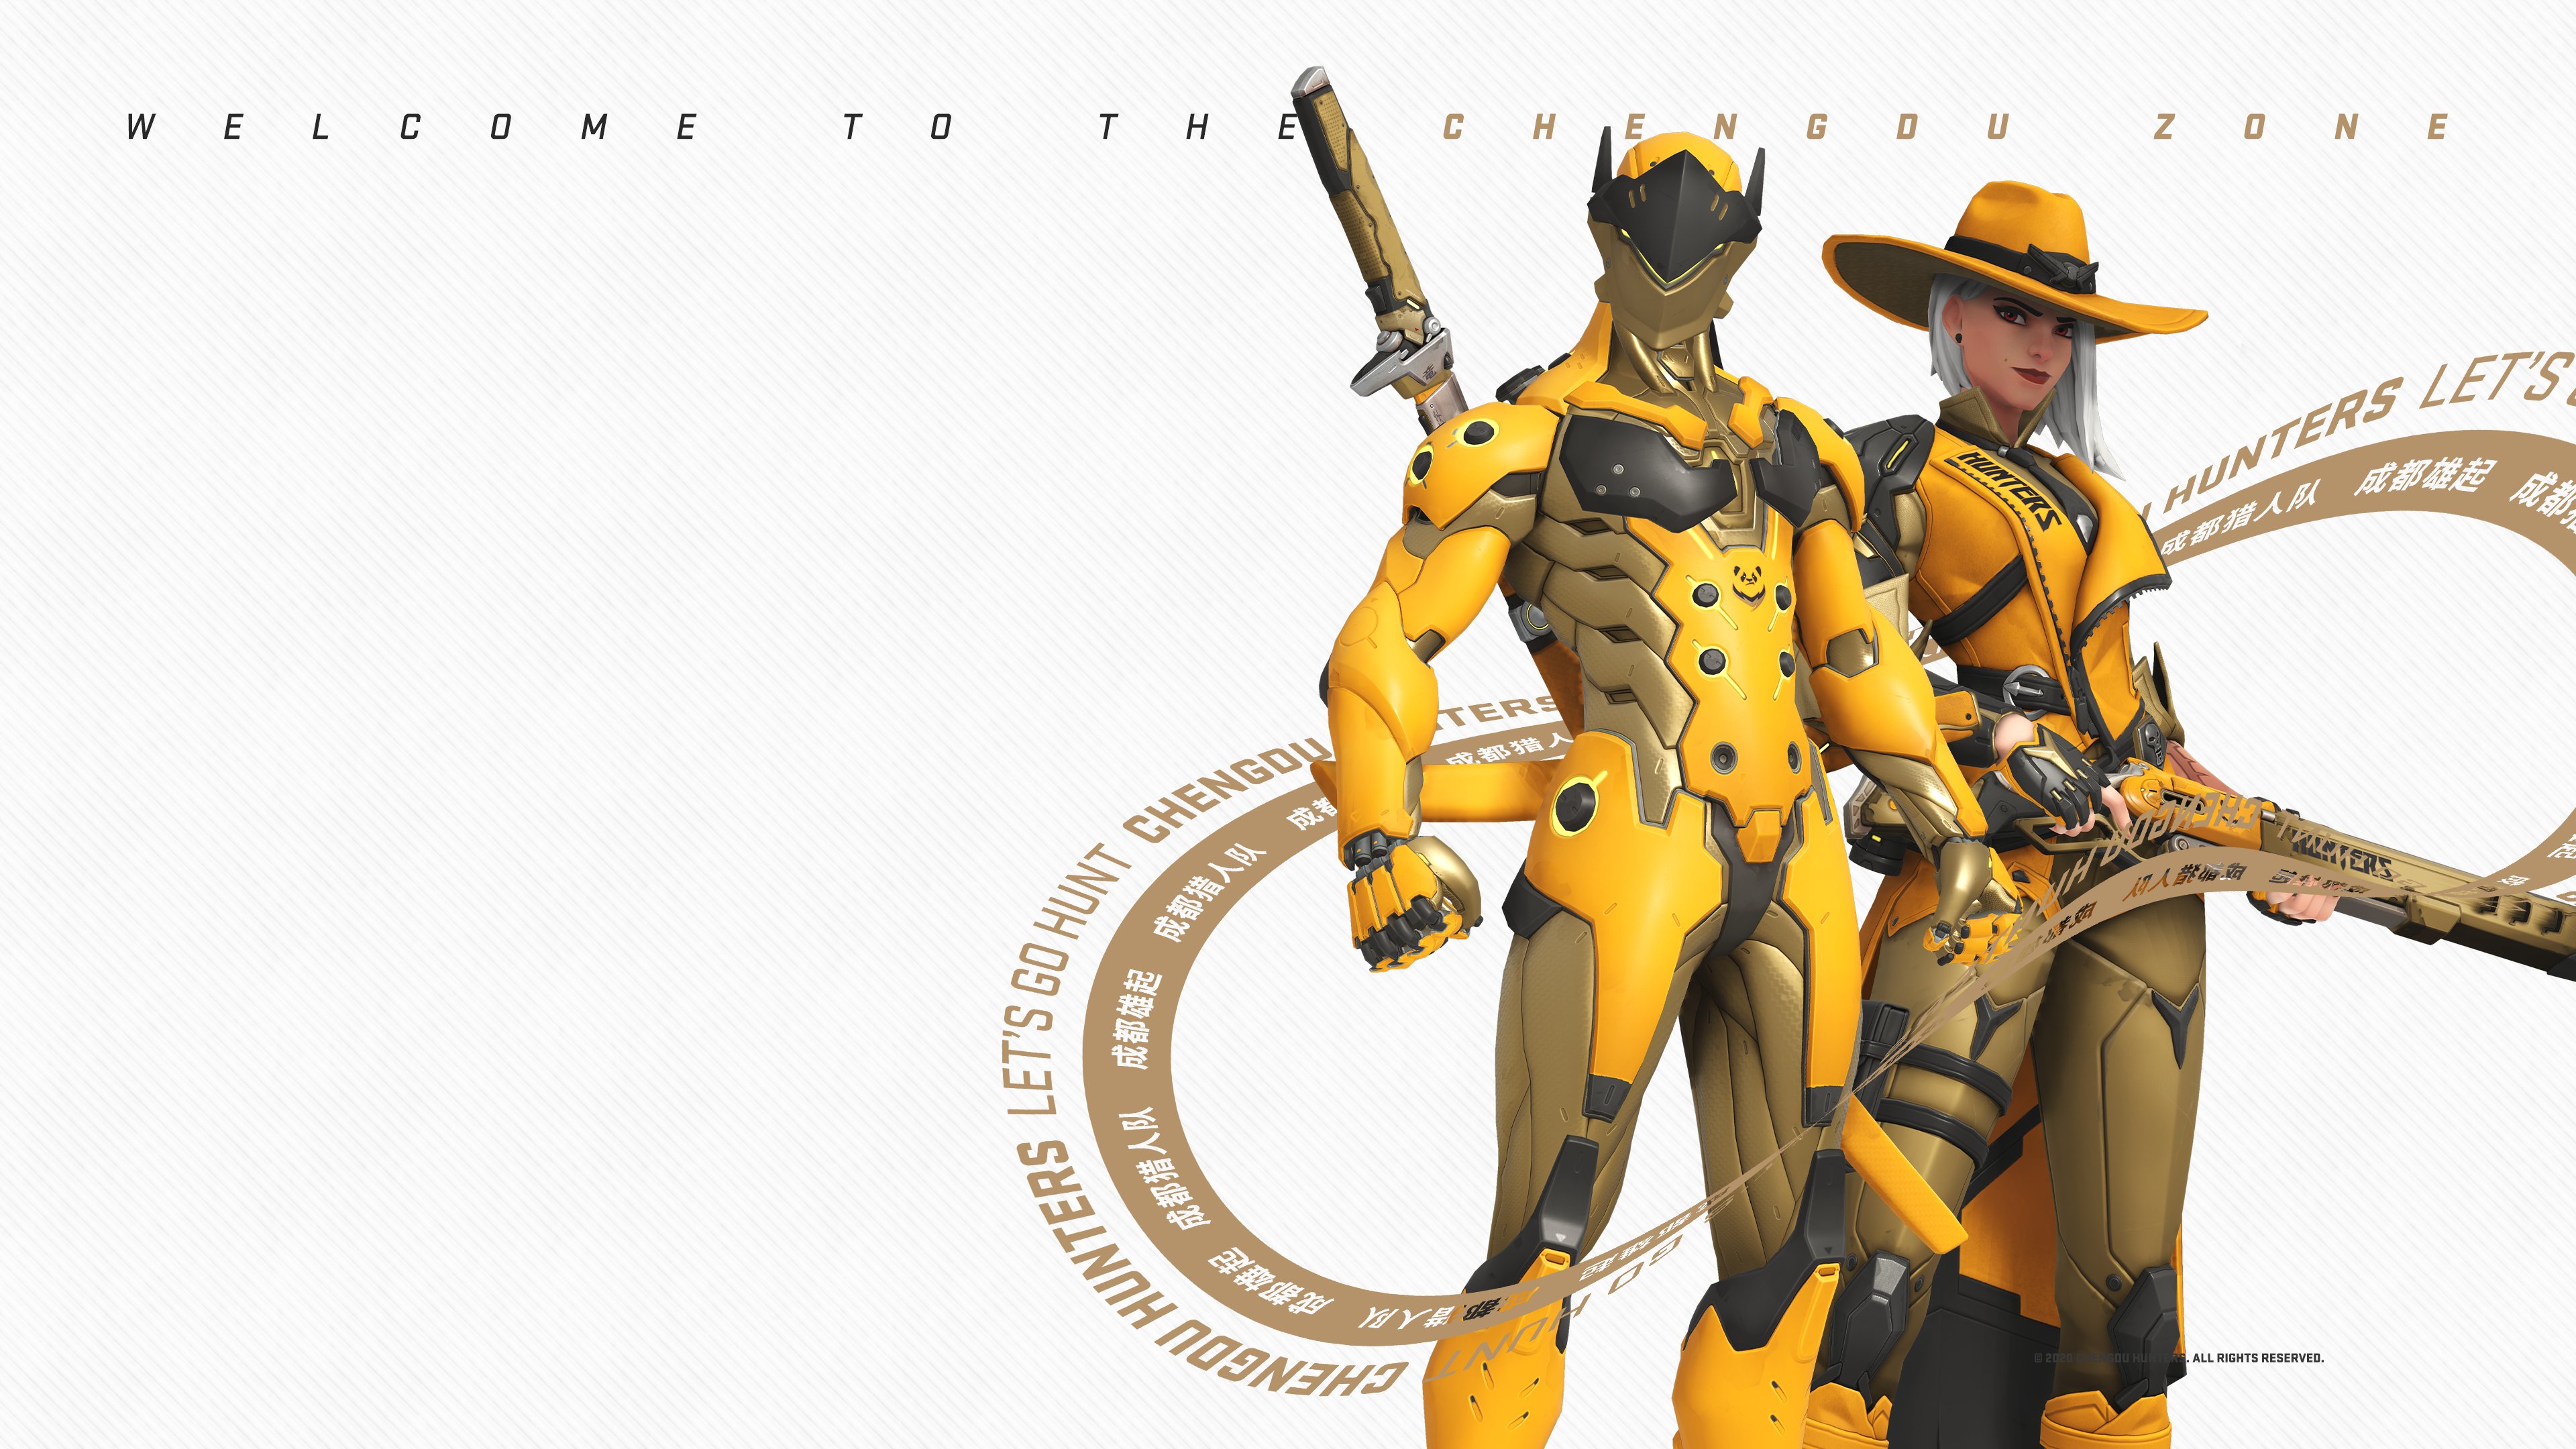 General 3840x2160 Overwatch Overwatch League PC gaming video game girls video games video game art